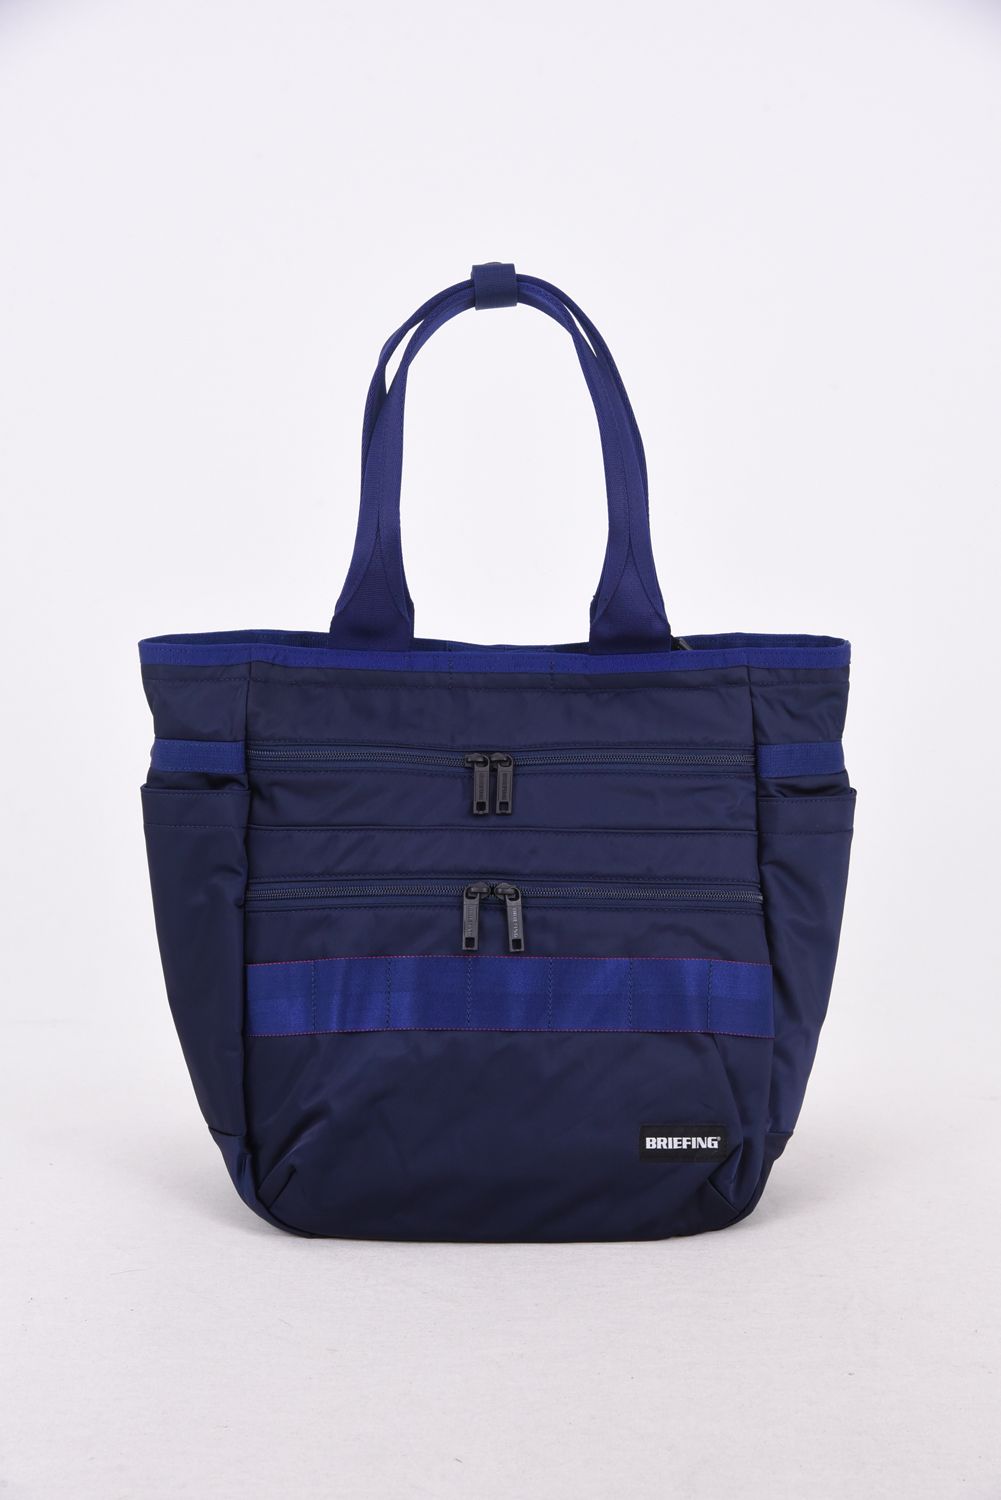 BRIEFING - 【エコツイル】 EVERYDAY TOTE ECO TWILL / カートバッグ